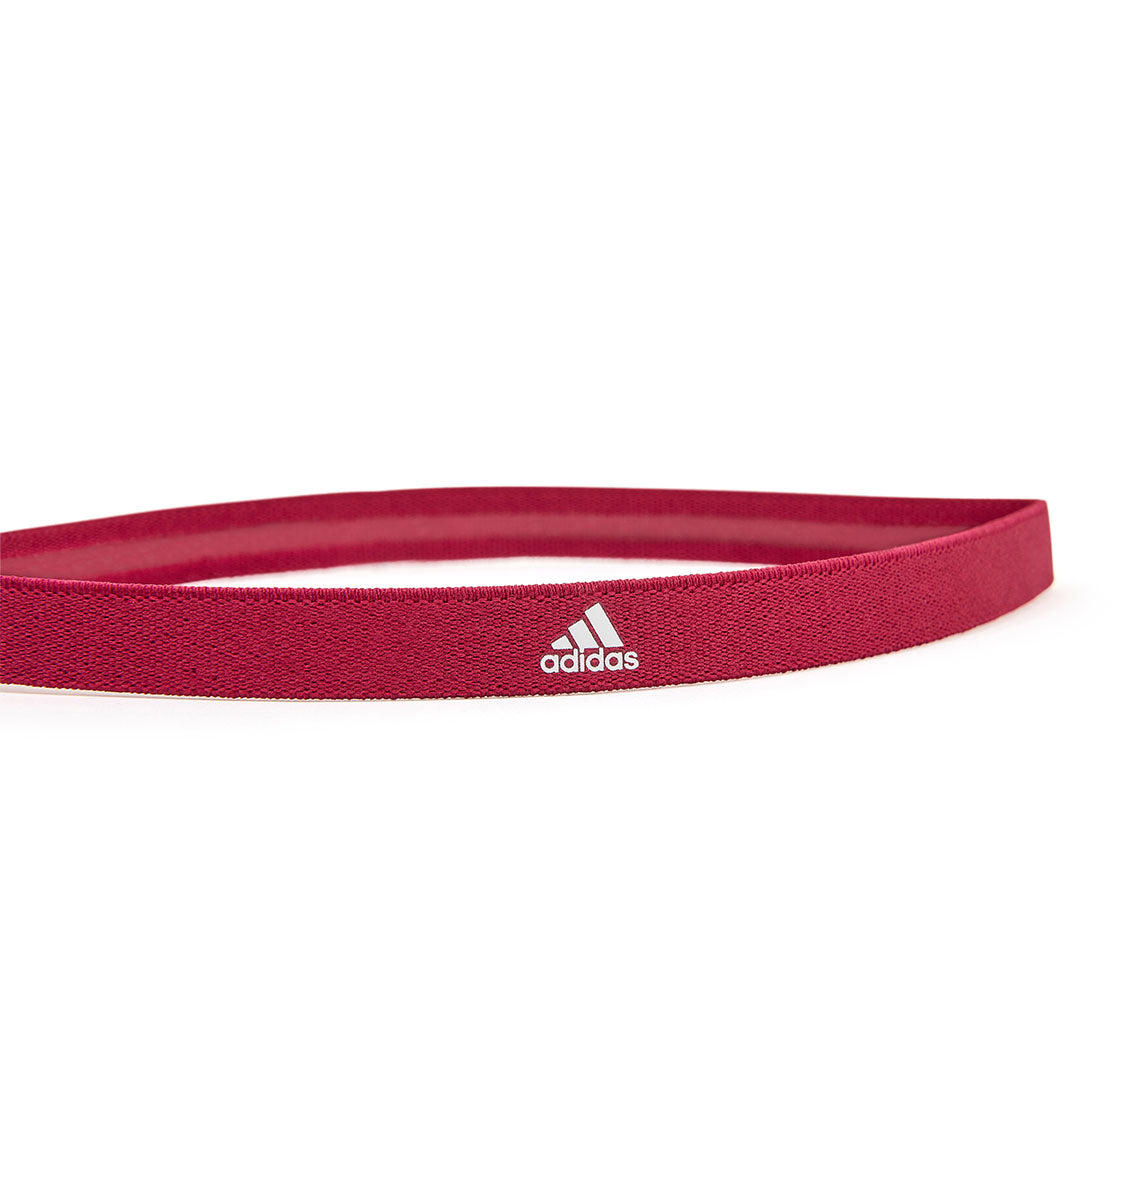 adidas Sports Hair Bands - Black/Grey/Powerberry (3 Pack) - 6